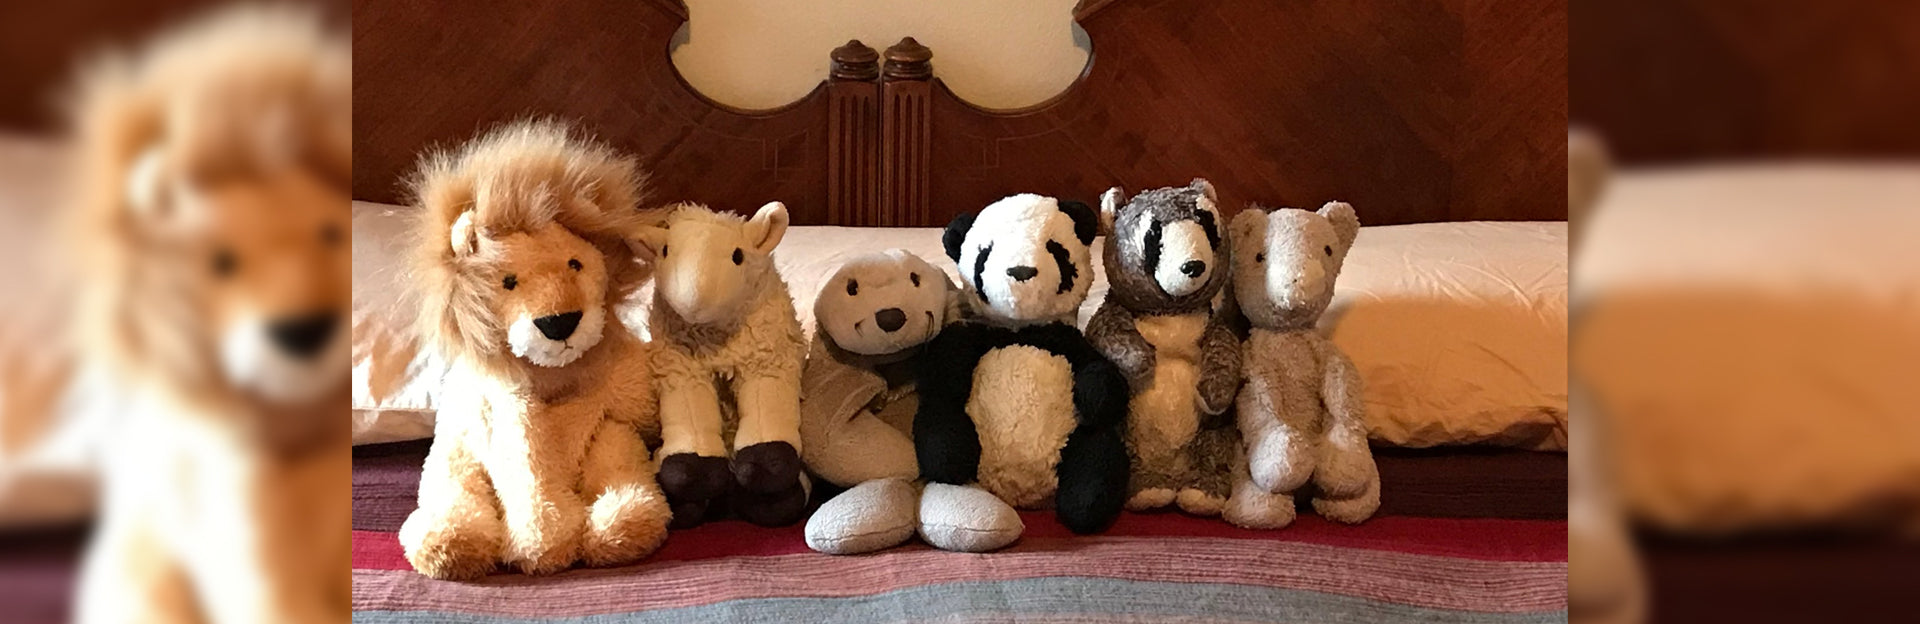 Unique Ideas to Display Your Stuffed Animals [Full Guide] - PlushThis